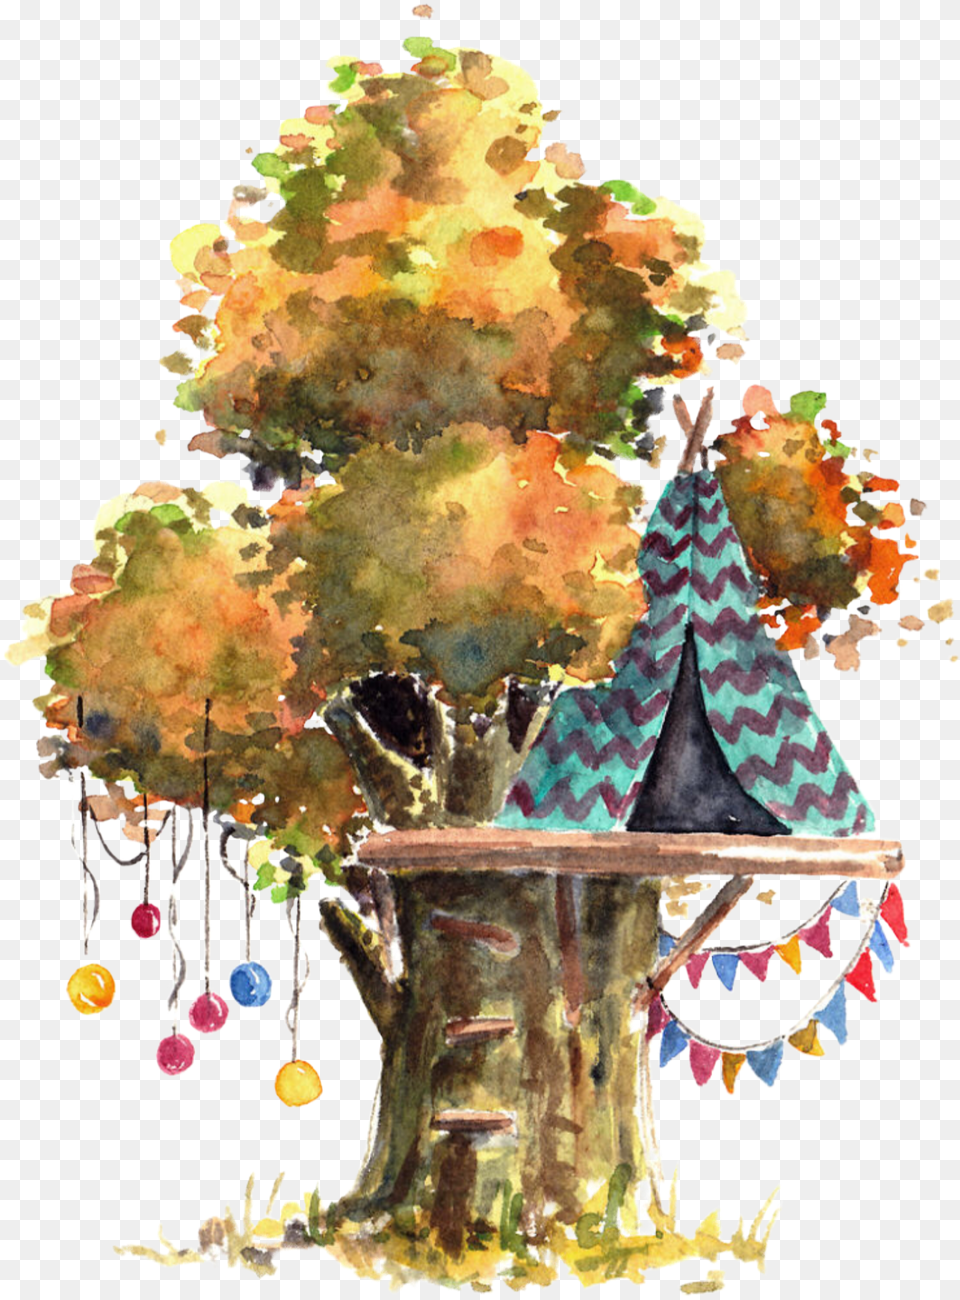 Watercolor Treehouse Teepee Balloons Tree Leaves Treehouse Watercolor, Plant, Art, Painting, Wedding Free Png Download